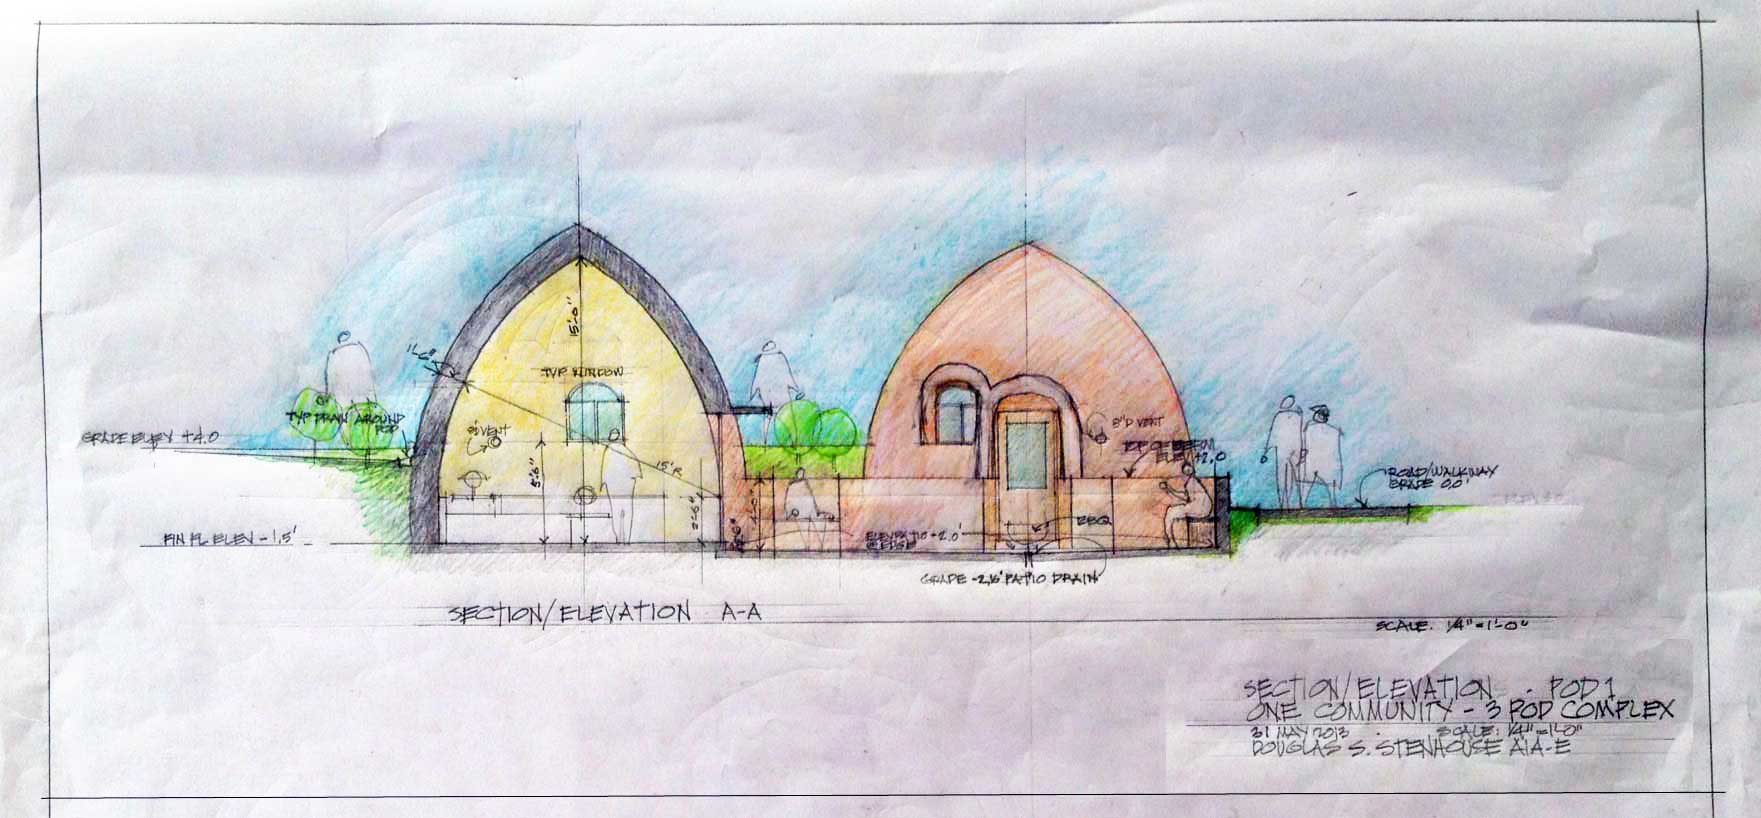 earthbag consruction, superadobe construction, super adobe construction, earth building, earth dome, dome home, One Community, sustainable living, eco living, dirt home, building with earth, earthbag village, sustainable building, construction of the future, facilitating the evolution of sustainability